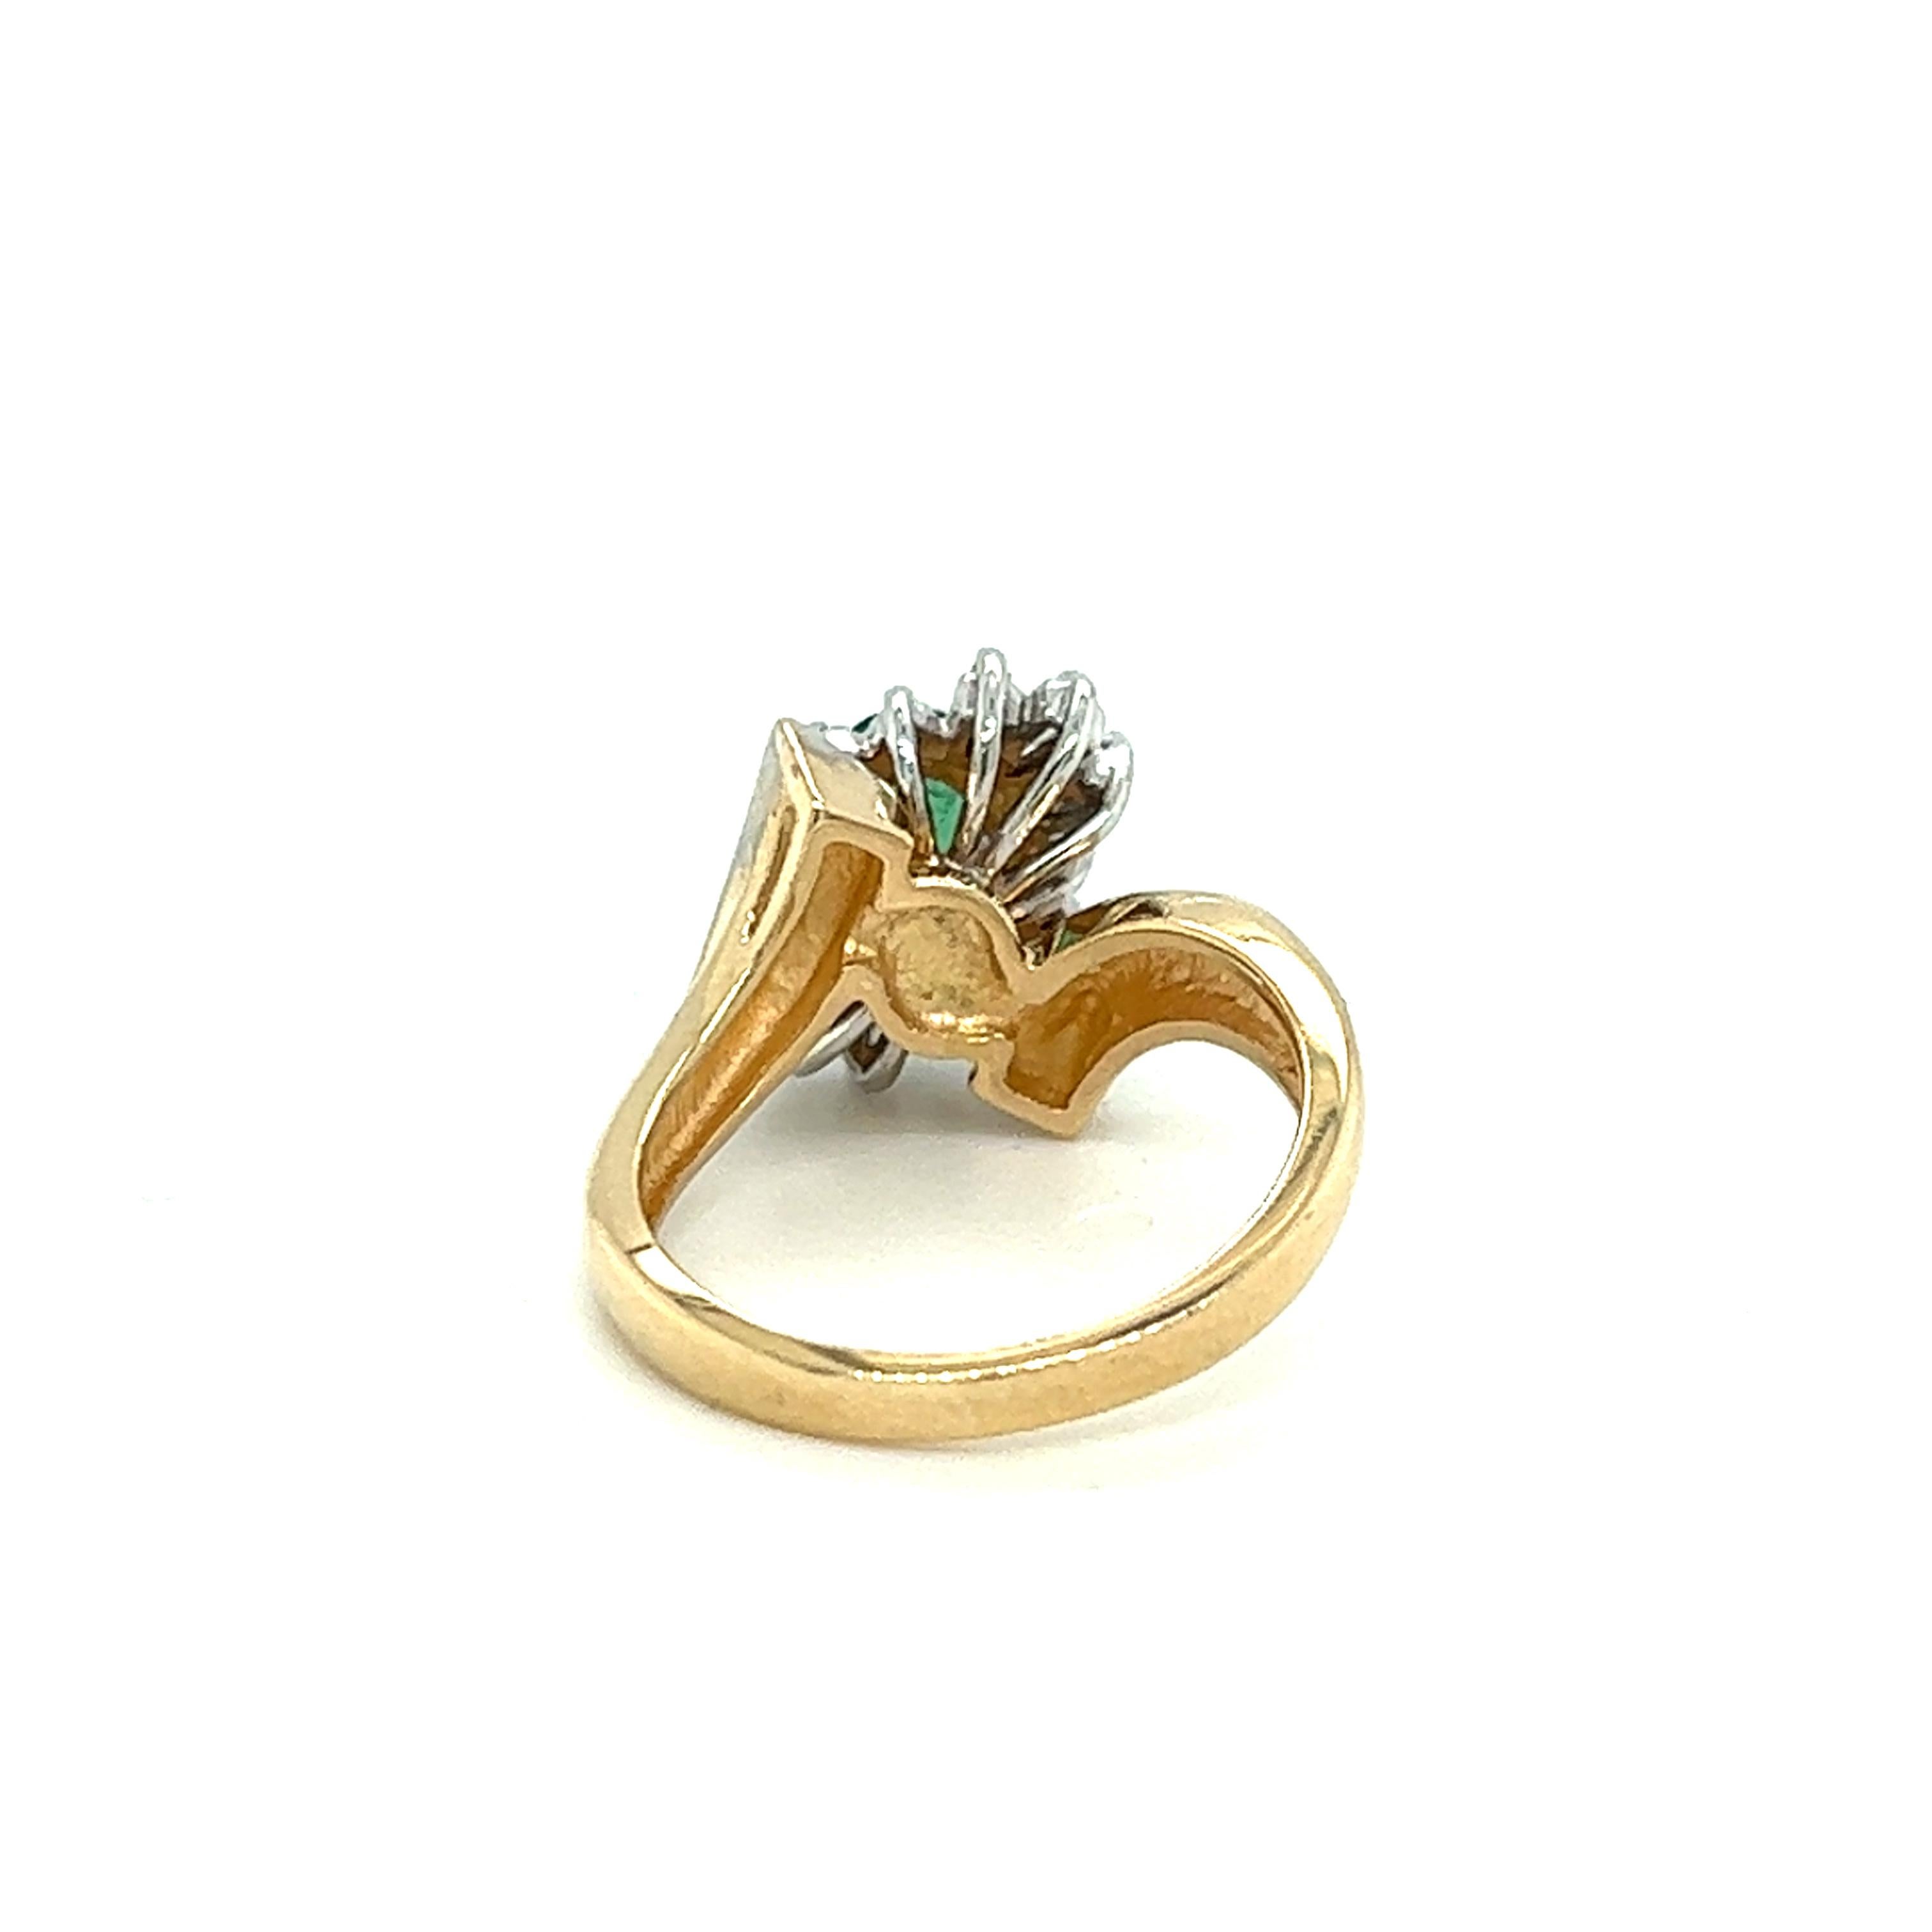 One 14 karat yellow and white gold (stamped 14K) bypass design ring set with one 7x5mm oval green emerald, six (6) baguette diamonds, approximately .10 carat total weight with matching H/I color and I1 clarity and eight (8) single cut diamonds,